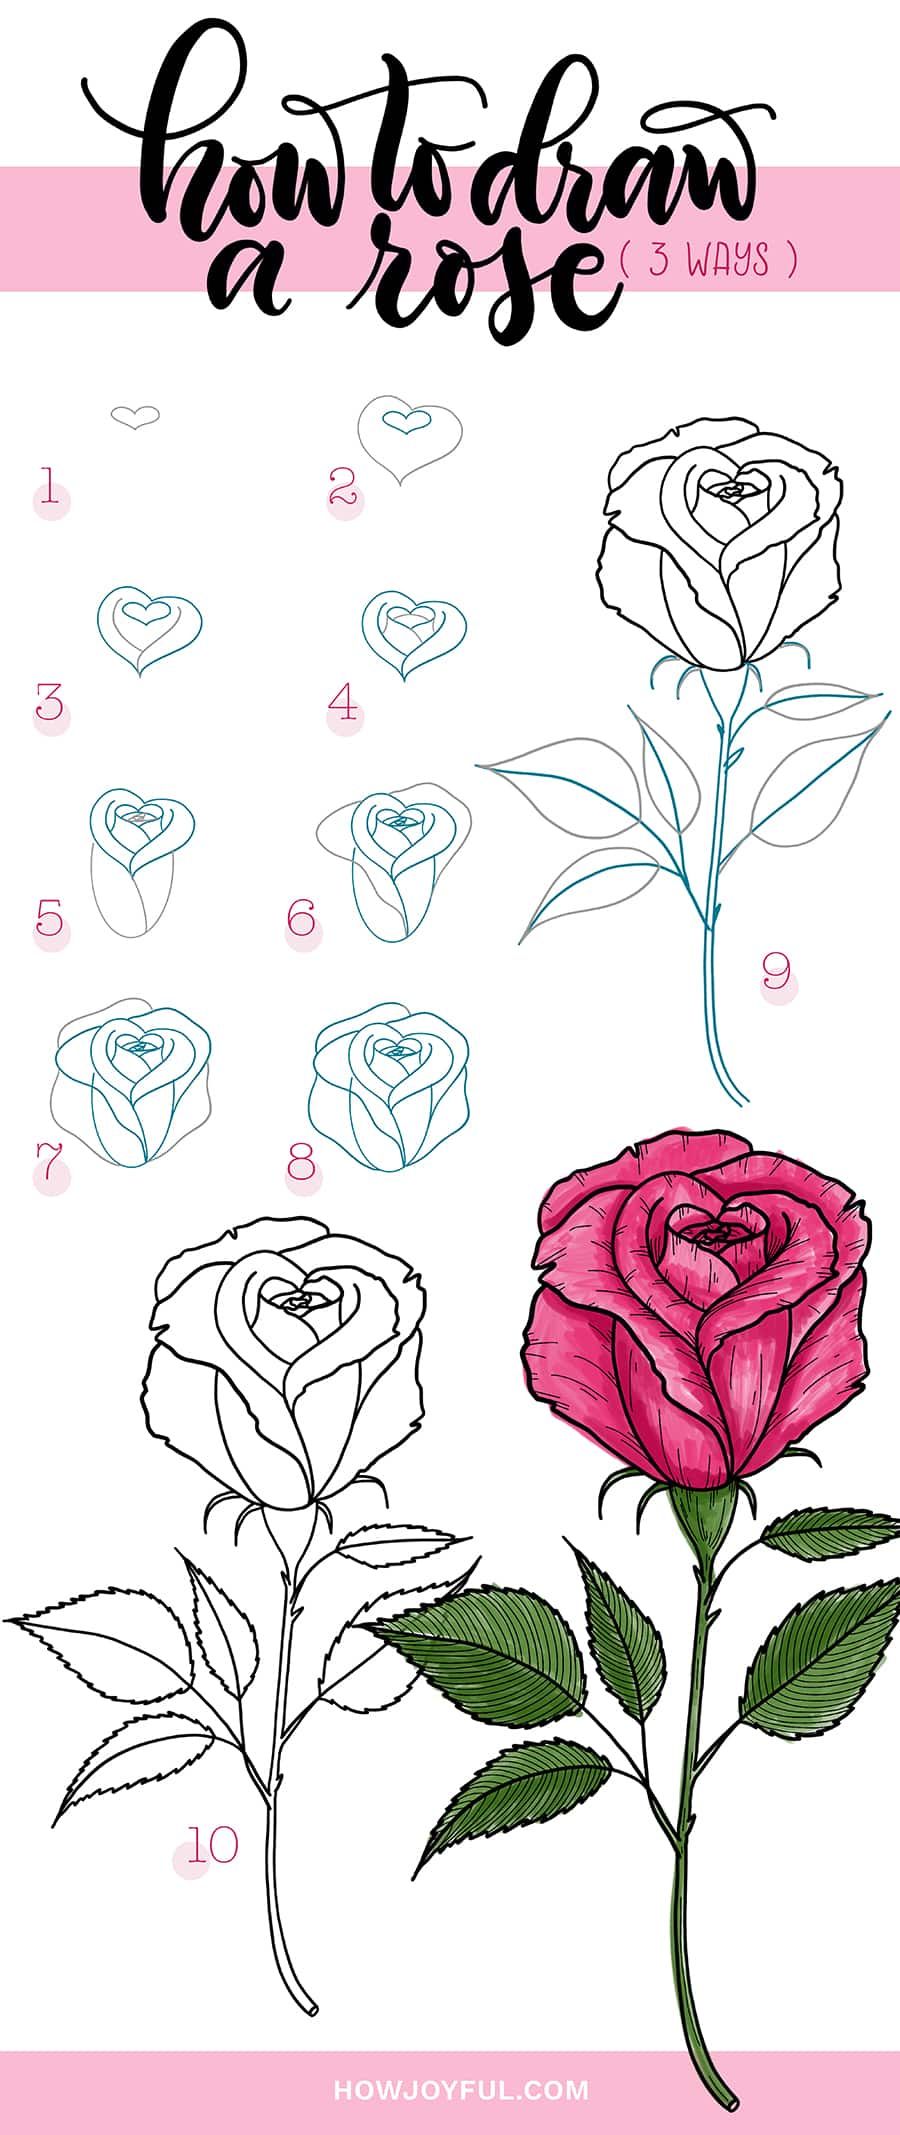 Drawings of roses: How to draw simple roses step by step (4 ways)